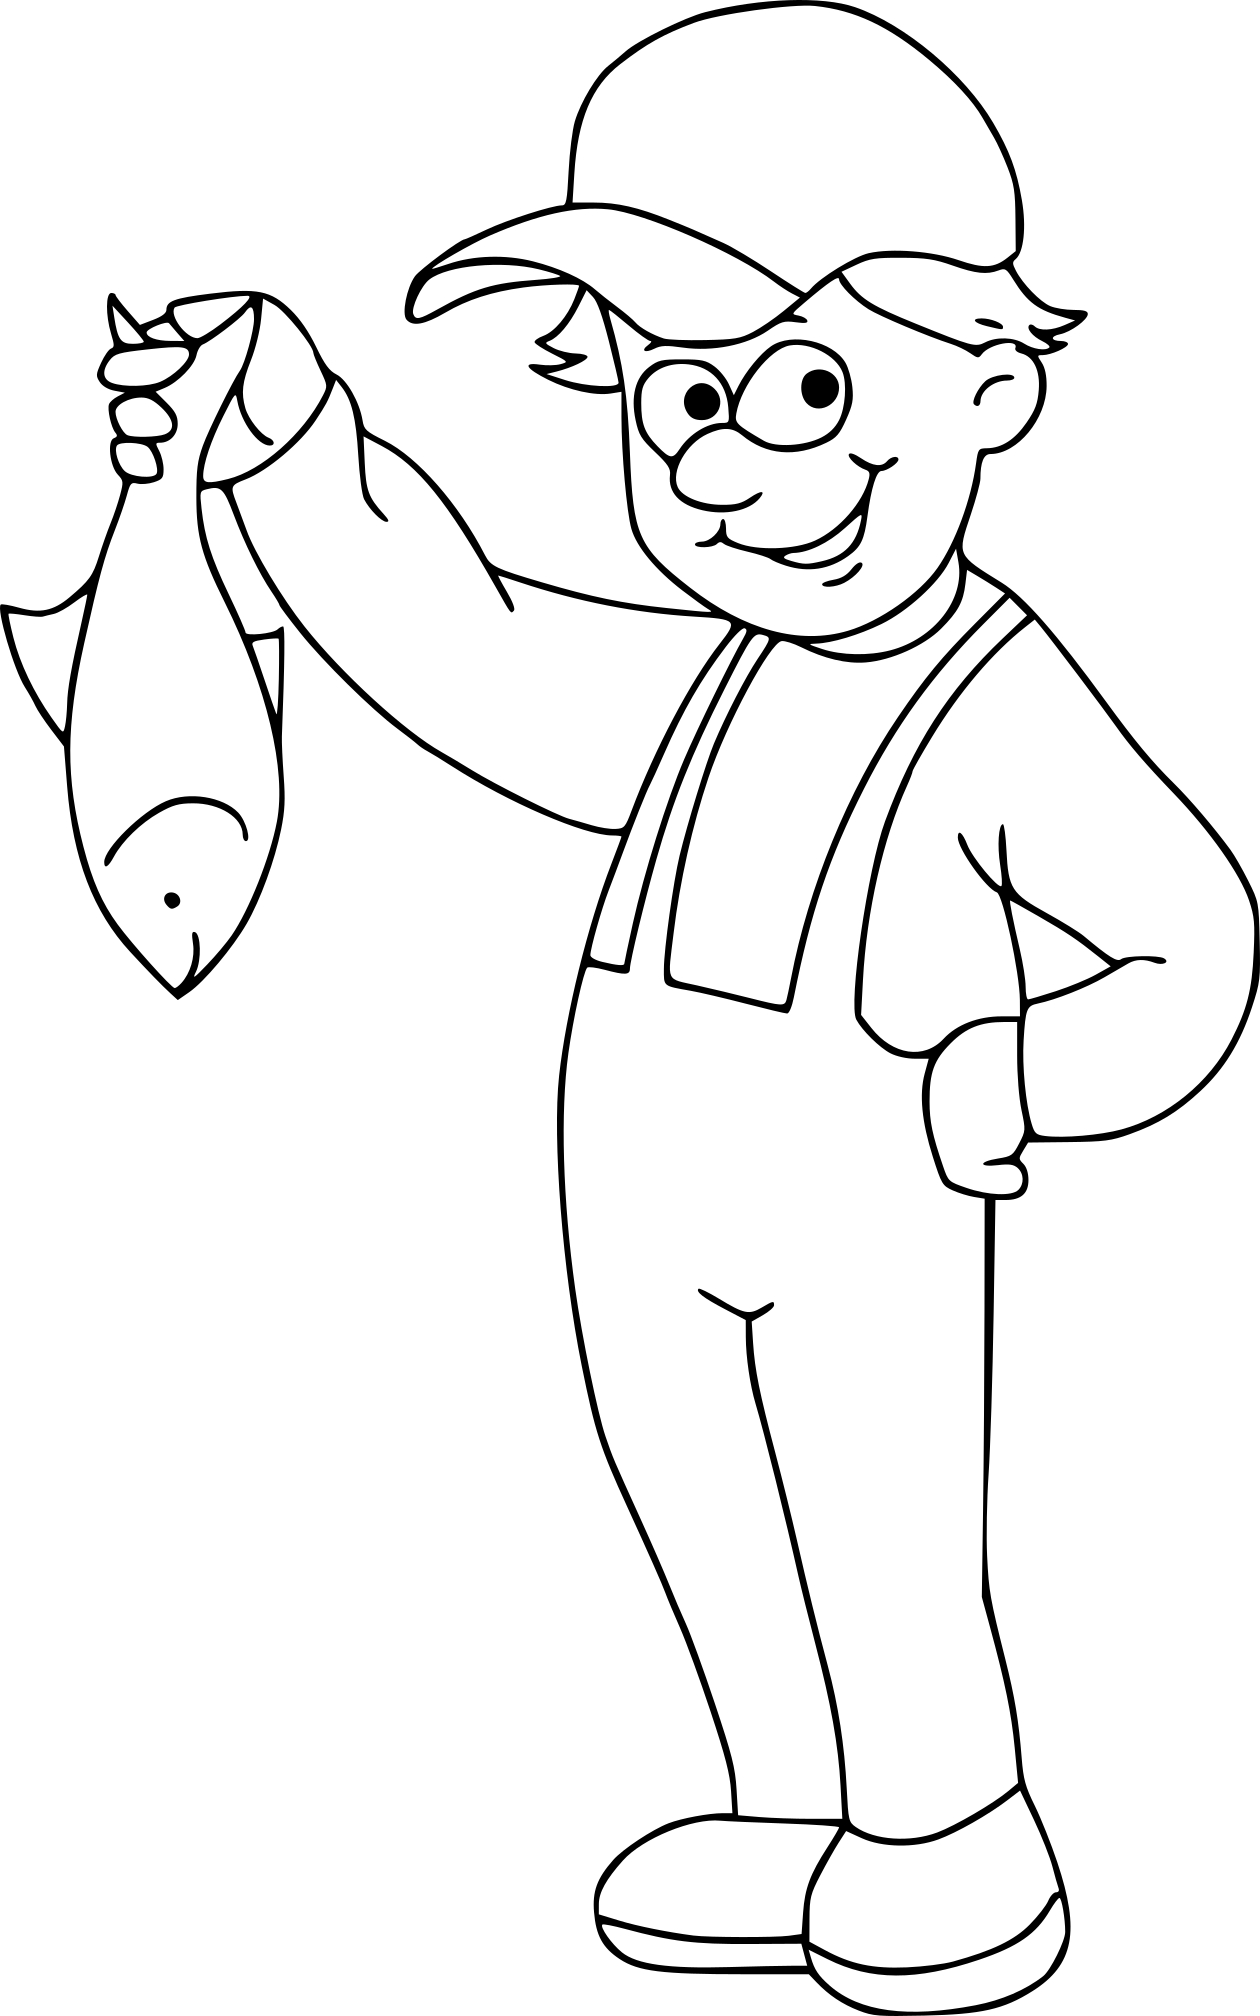 Fishing drawing and coloring page